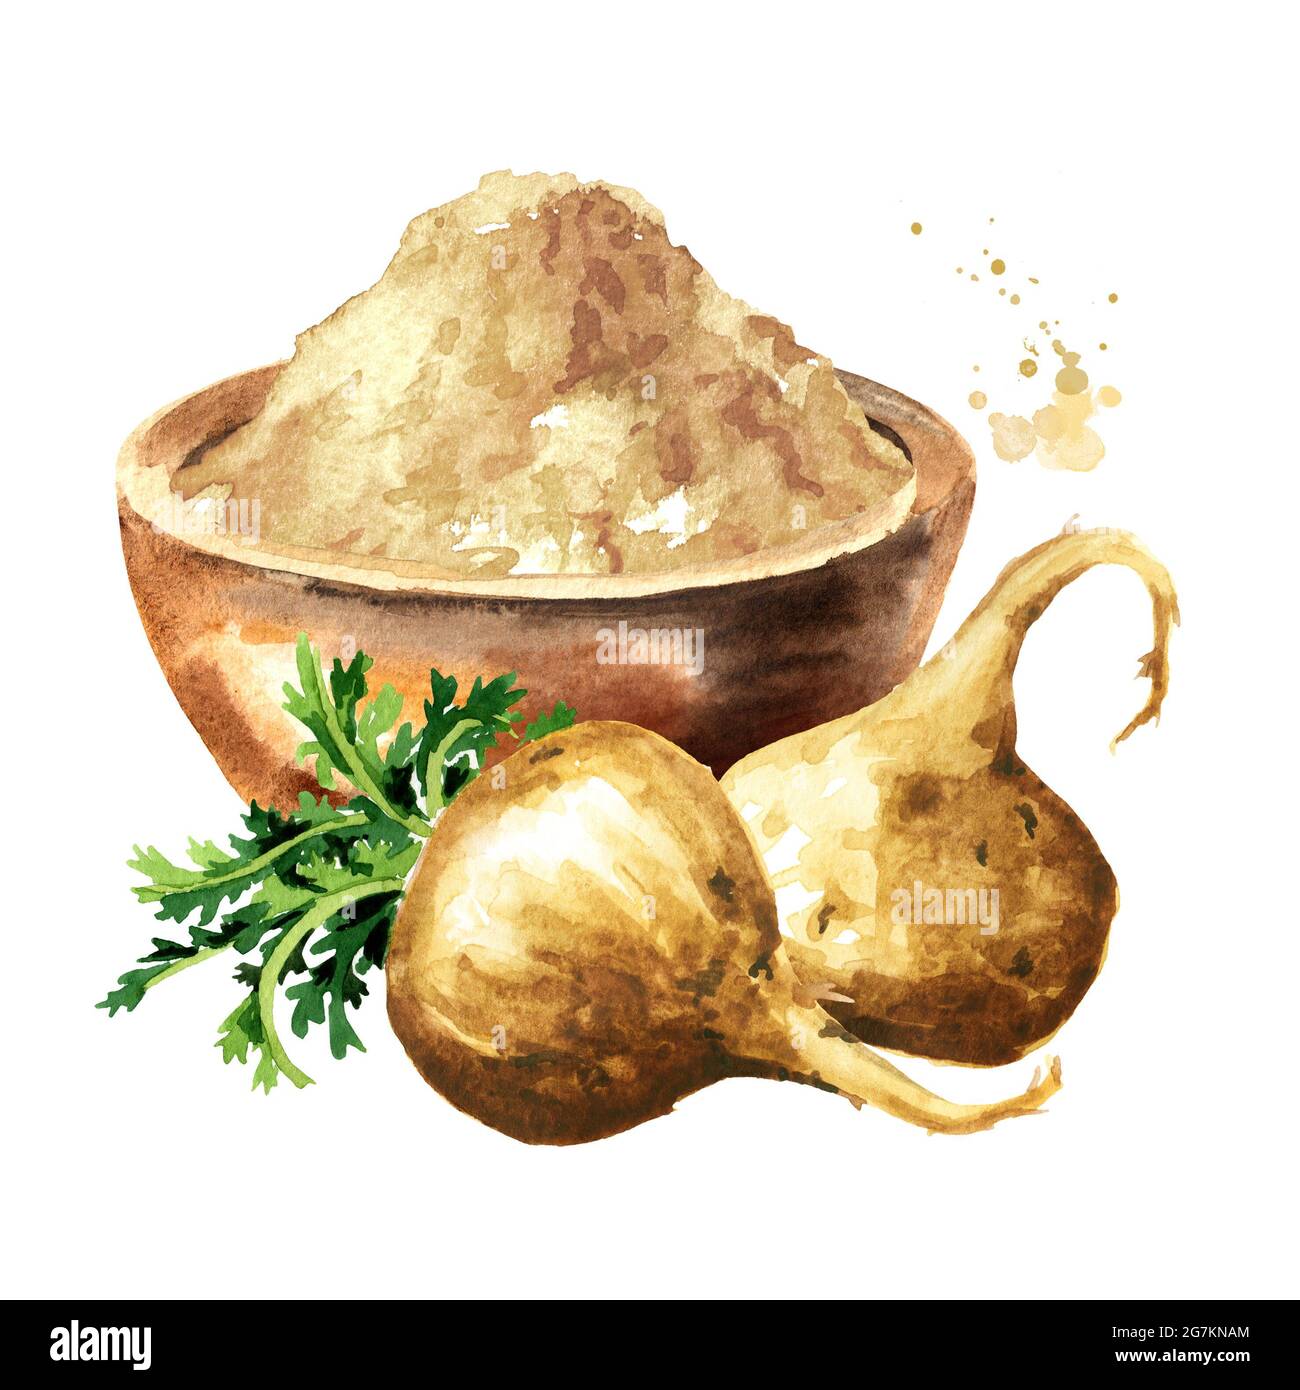 Which is better maca or ginseng